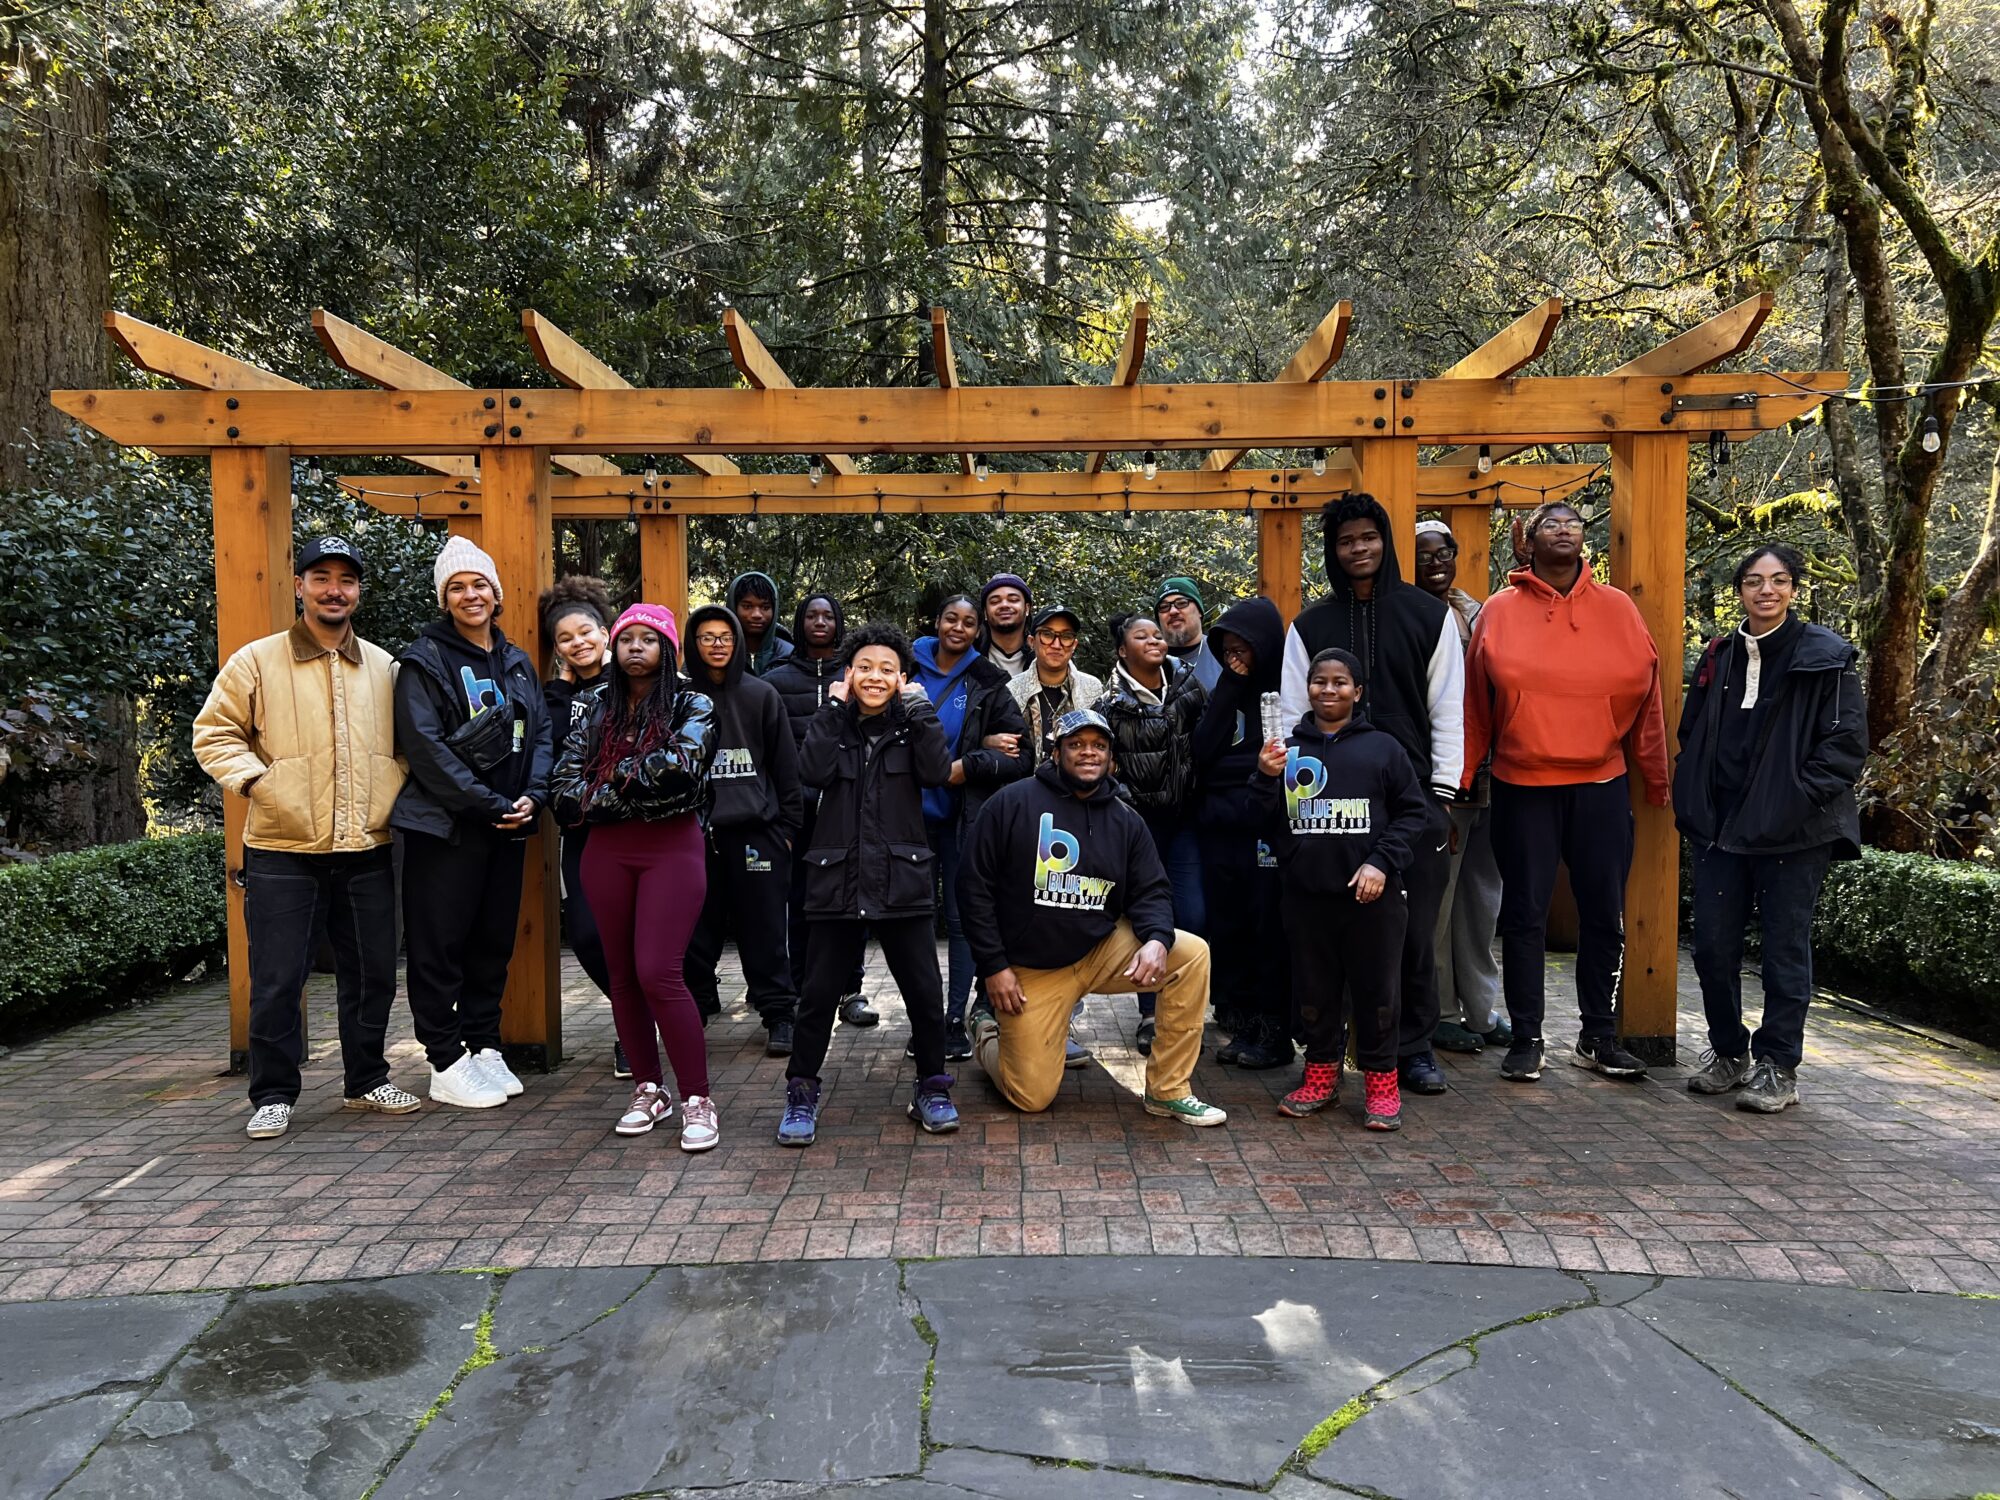 Group of 20 Blueprint Foundation youth and mentors. The group is posed in front of a pergola in a courtyard at Leach Botanical Garden with vegetation visible in the background. 